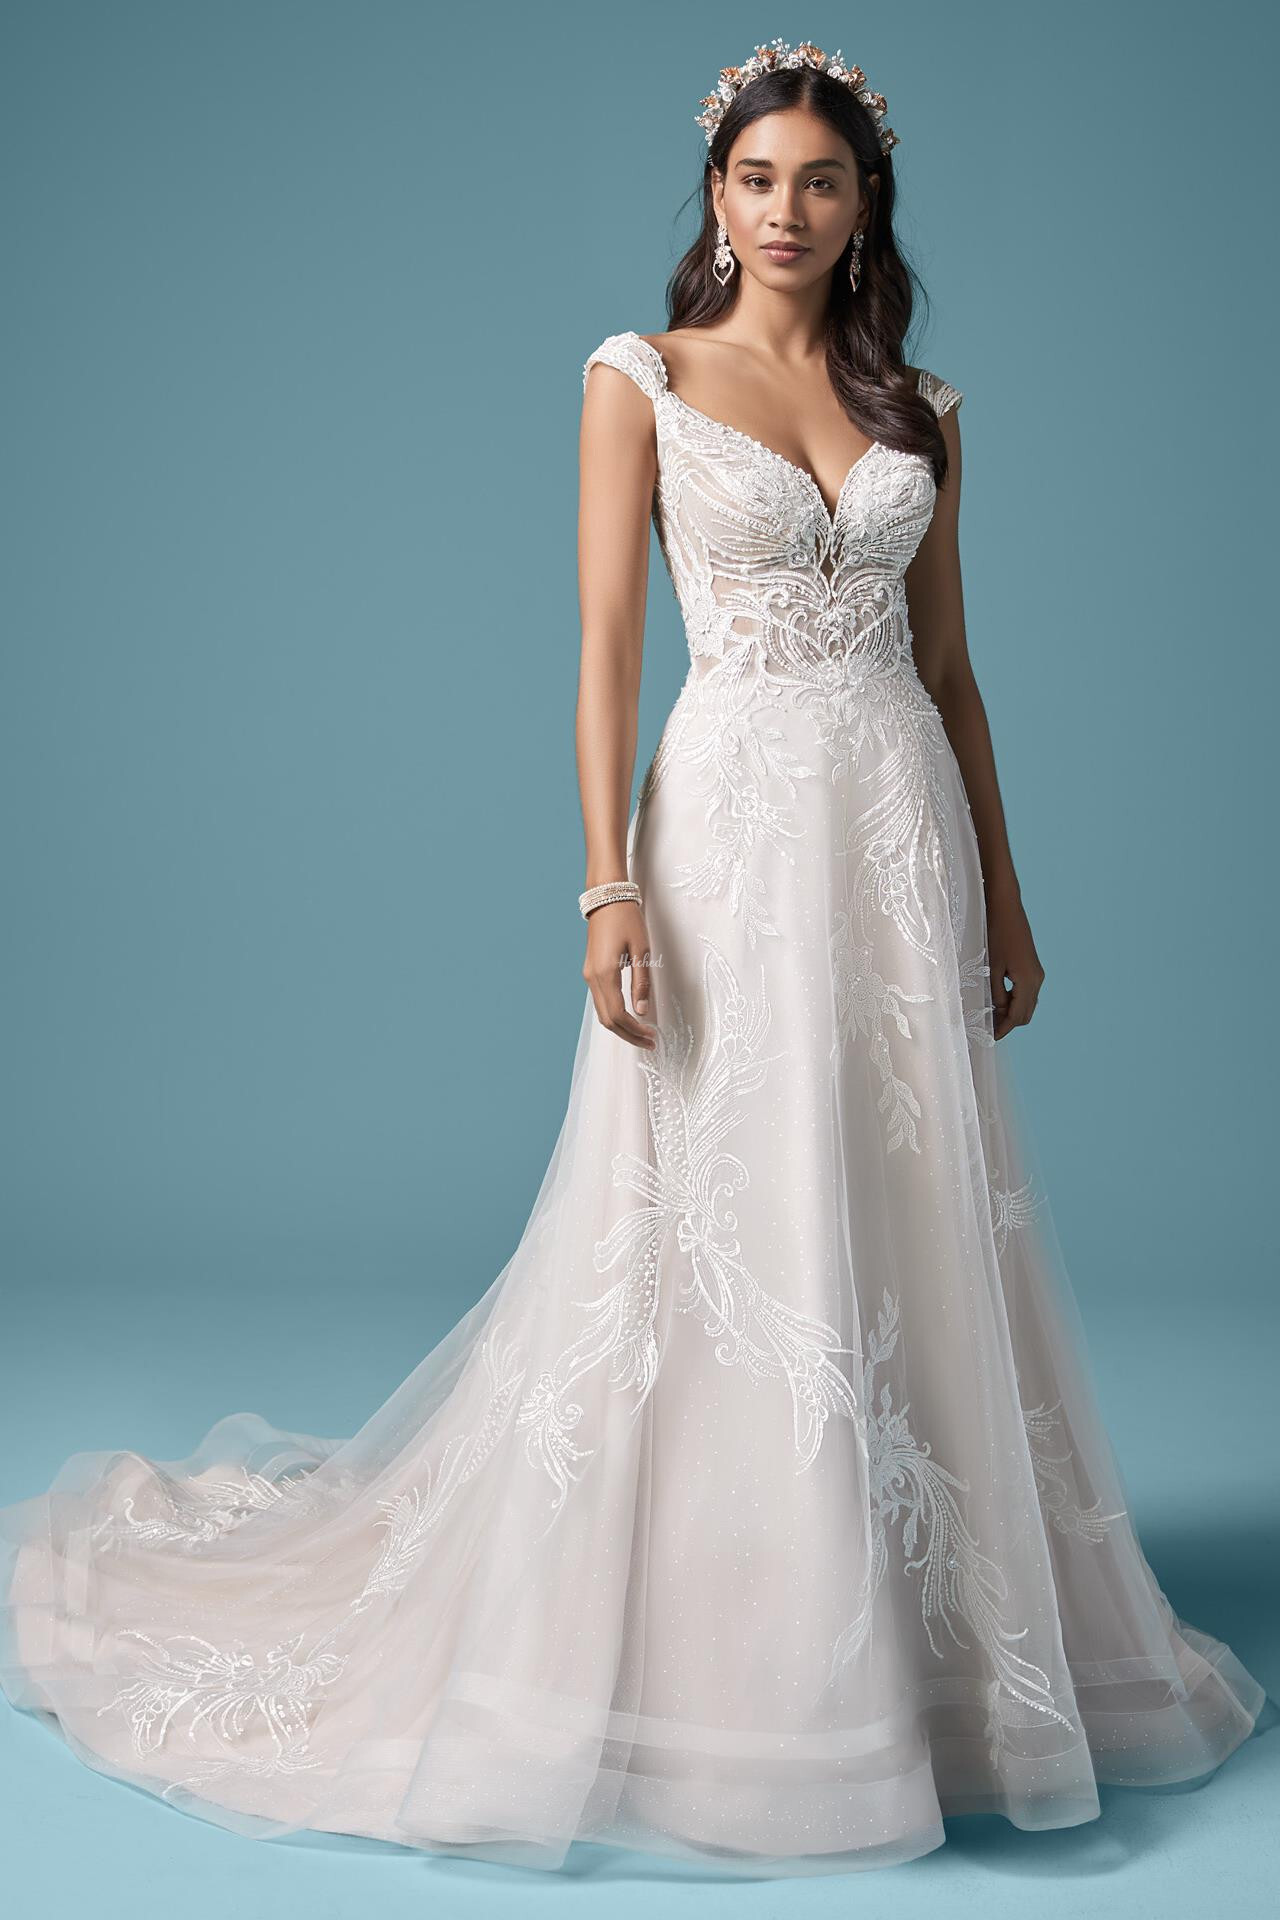 Trina Wedding Dress from Maggie Sottero - hitched.co.uk